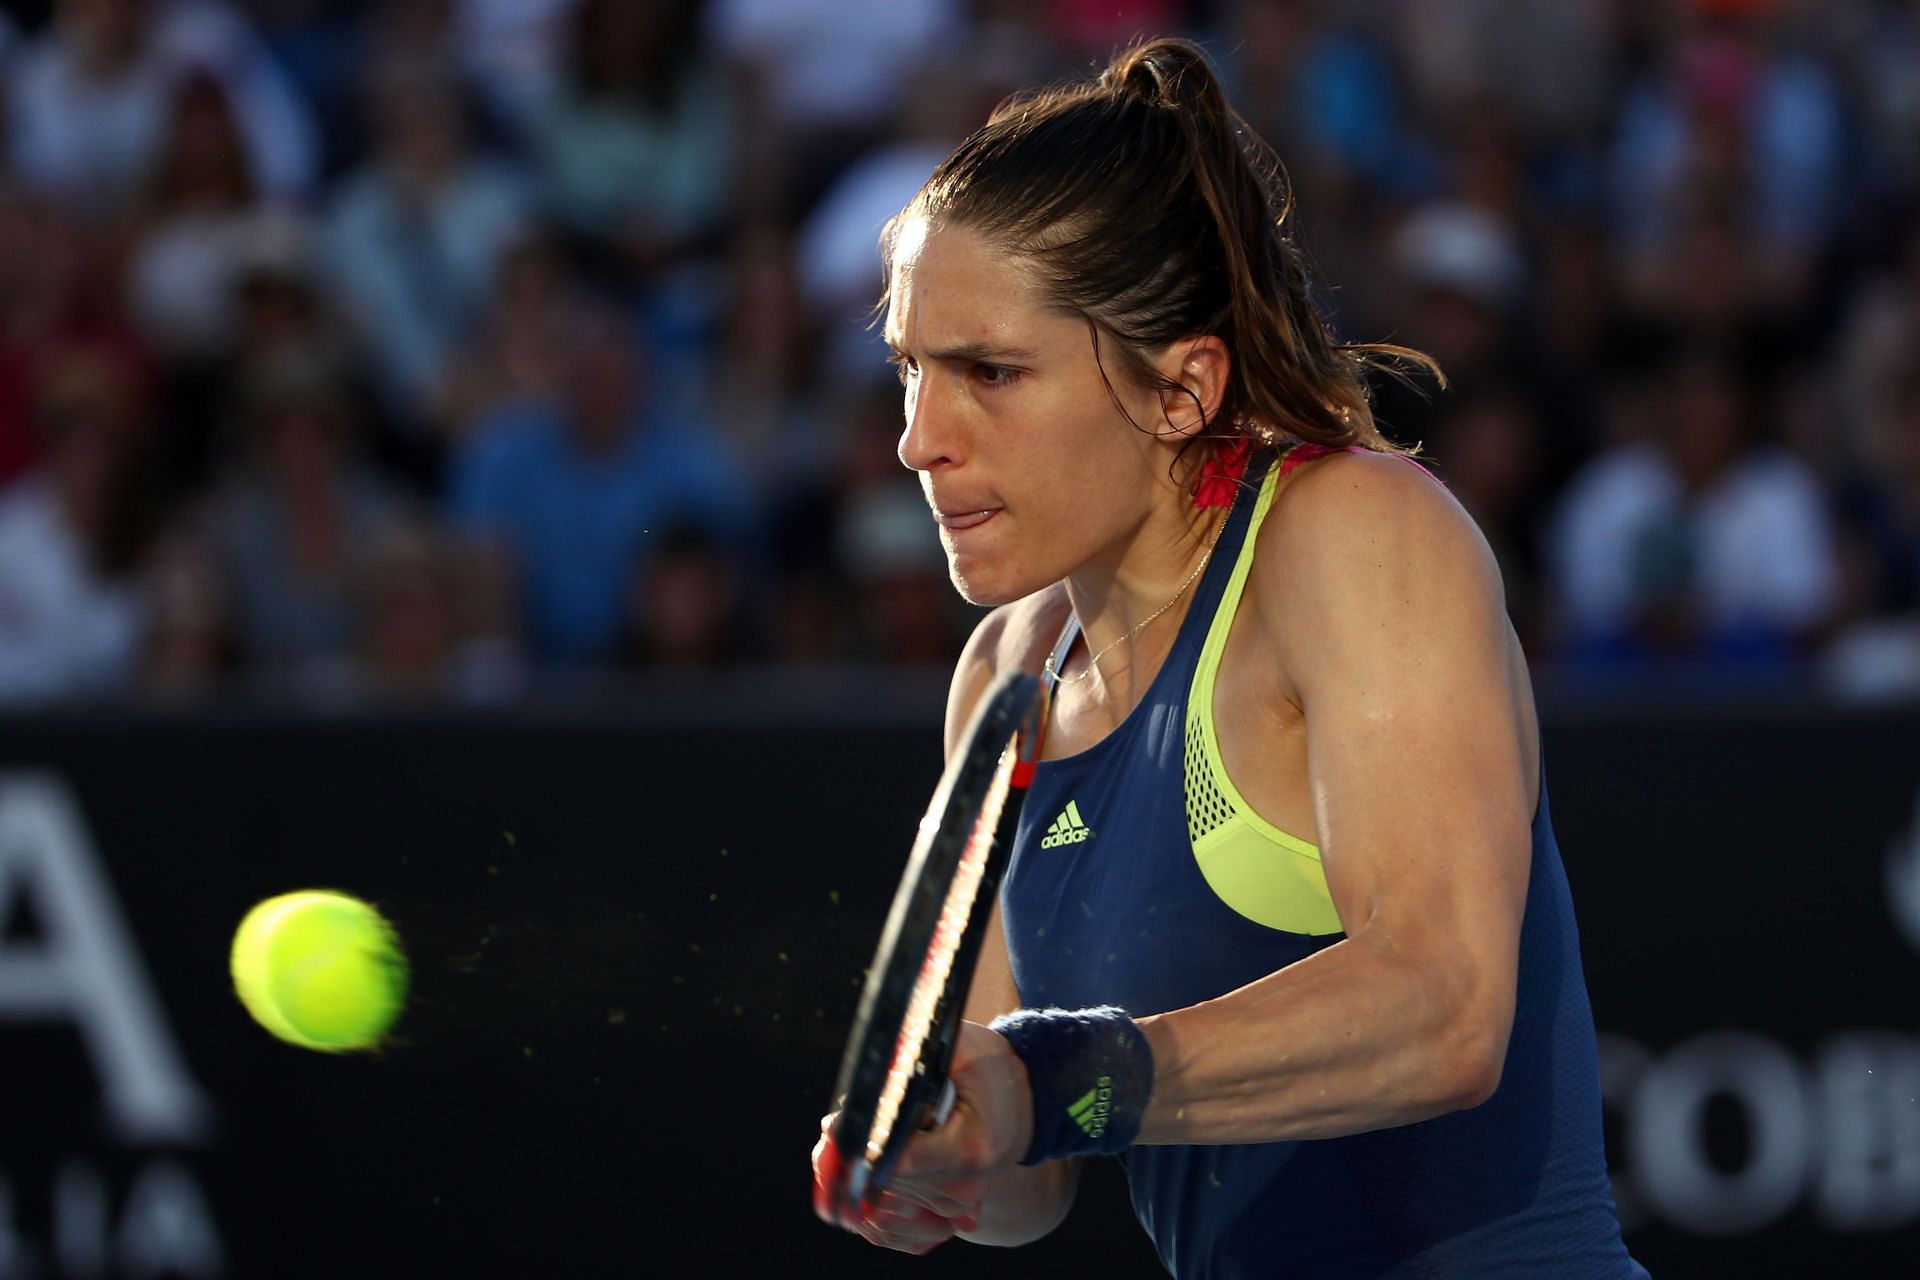 Petkovic will now be looking to build on her win.